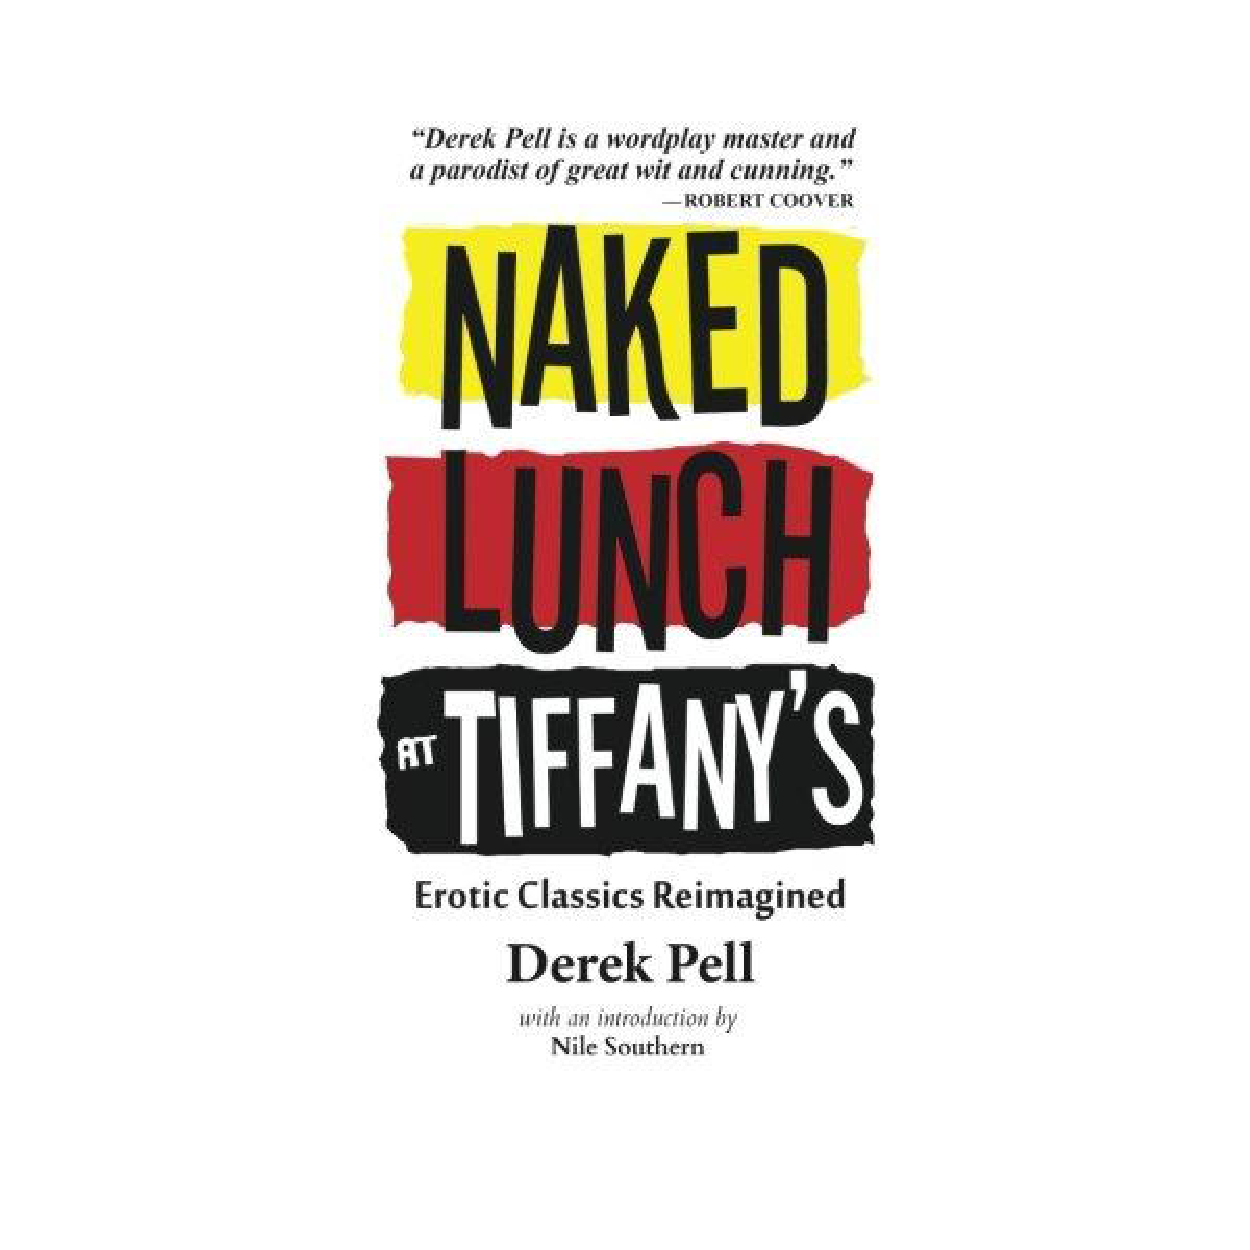 Naked Lunch at Tiffany's (Short-Fiction Collection) by Derek Pell